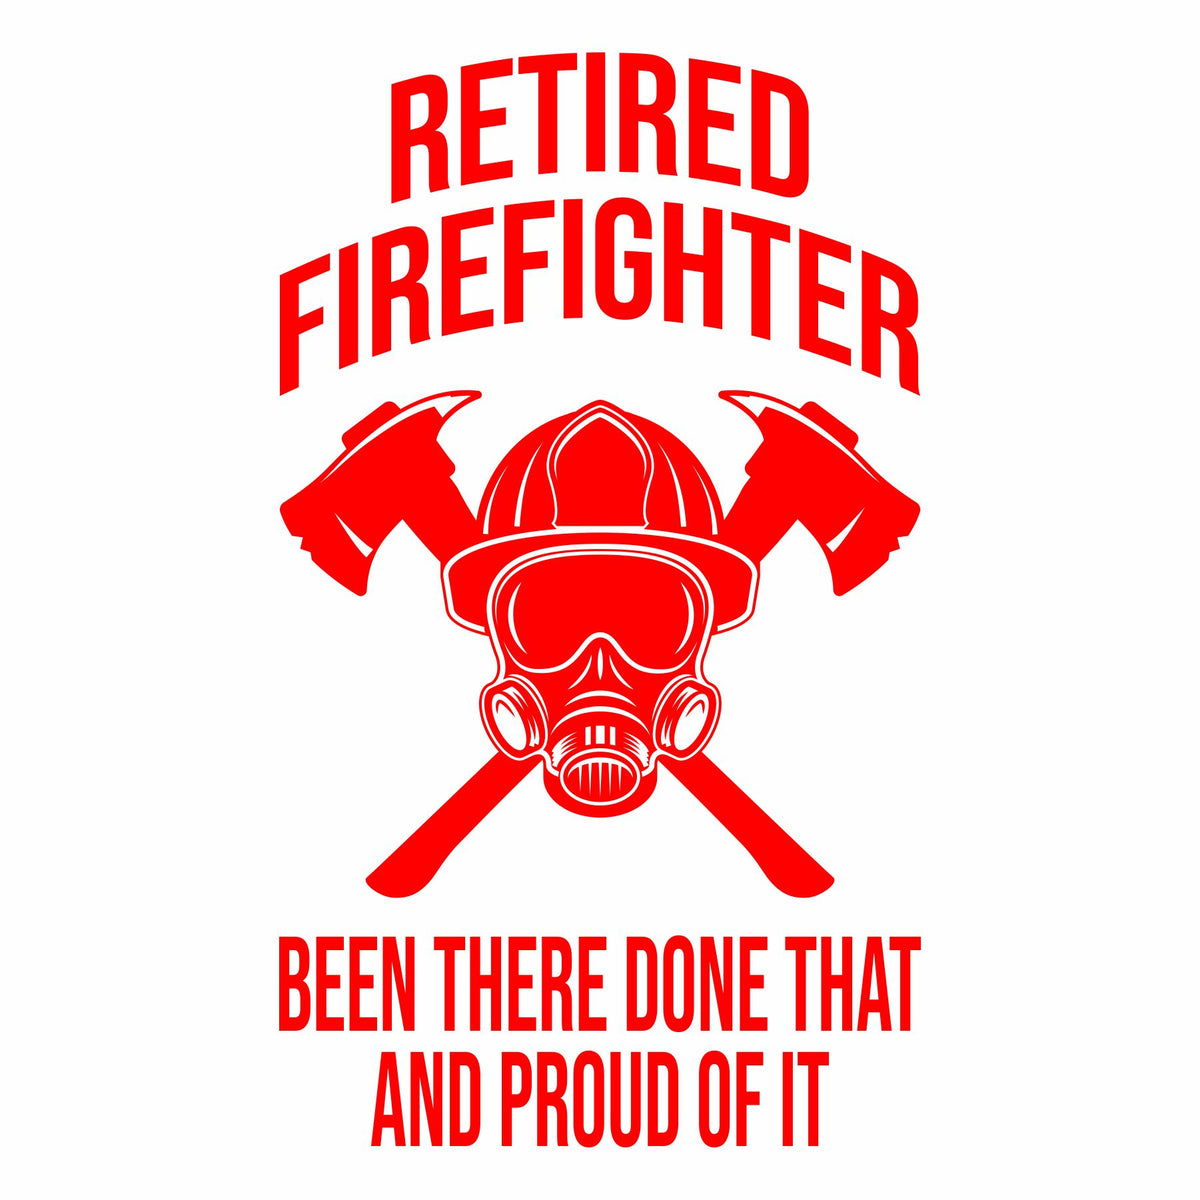 Retired Firefighter - Been There Done That - Vinyl Decal - Free Shipping